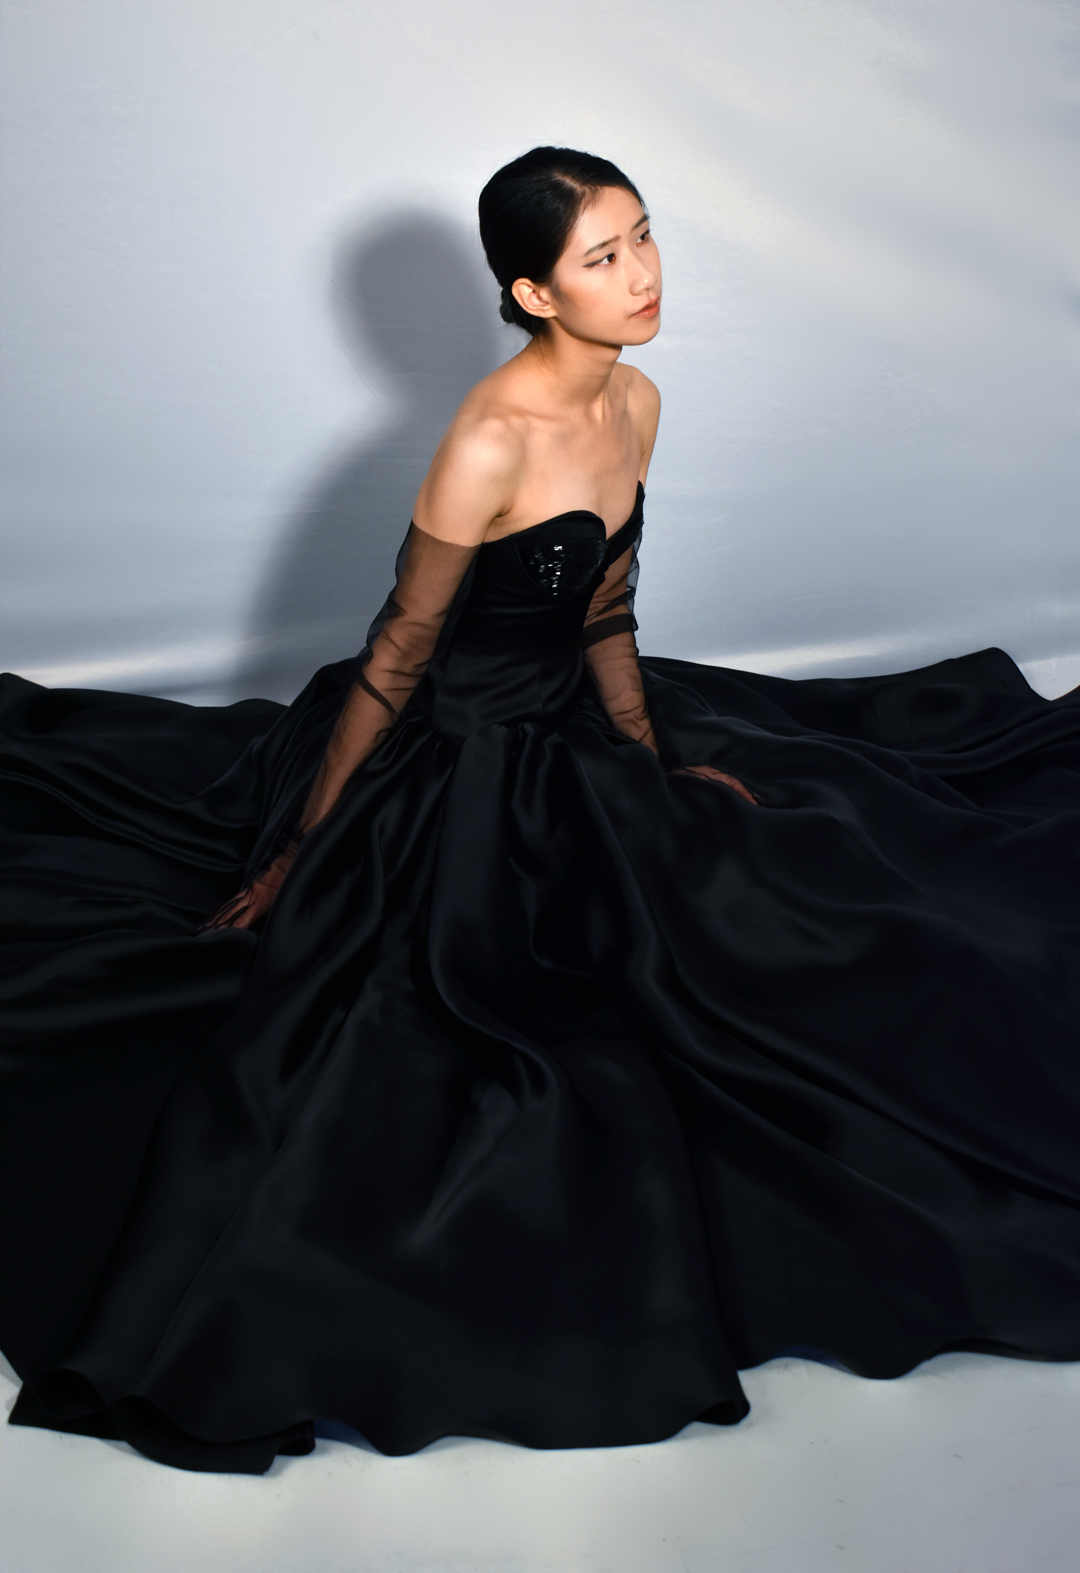 This black gown is made from 100 percent silk. The photo shows a woman sitting in a three-quarter view, wearing a black silk gown with beading covering three-quarters of the bodice cups. The floor-length gown has a drop-waist duchesse satin bodice with cone-like satin-faced organza skirt panels gathered along the drop-waist, spread onto the floor as she sits. The model is wearing black tulle gloves that cover three-quarters of her arms. Her head is turned away, looking up to the side. The background is white.